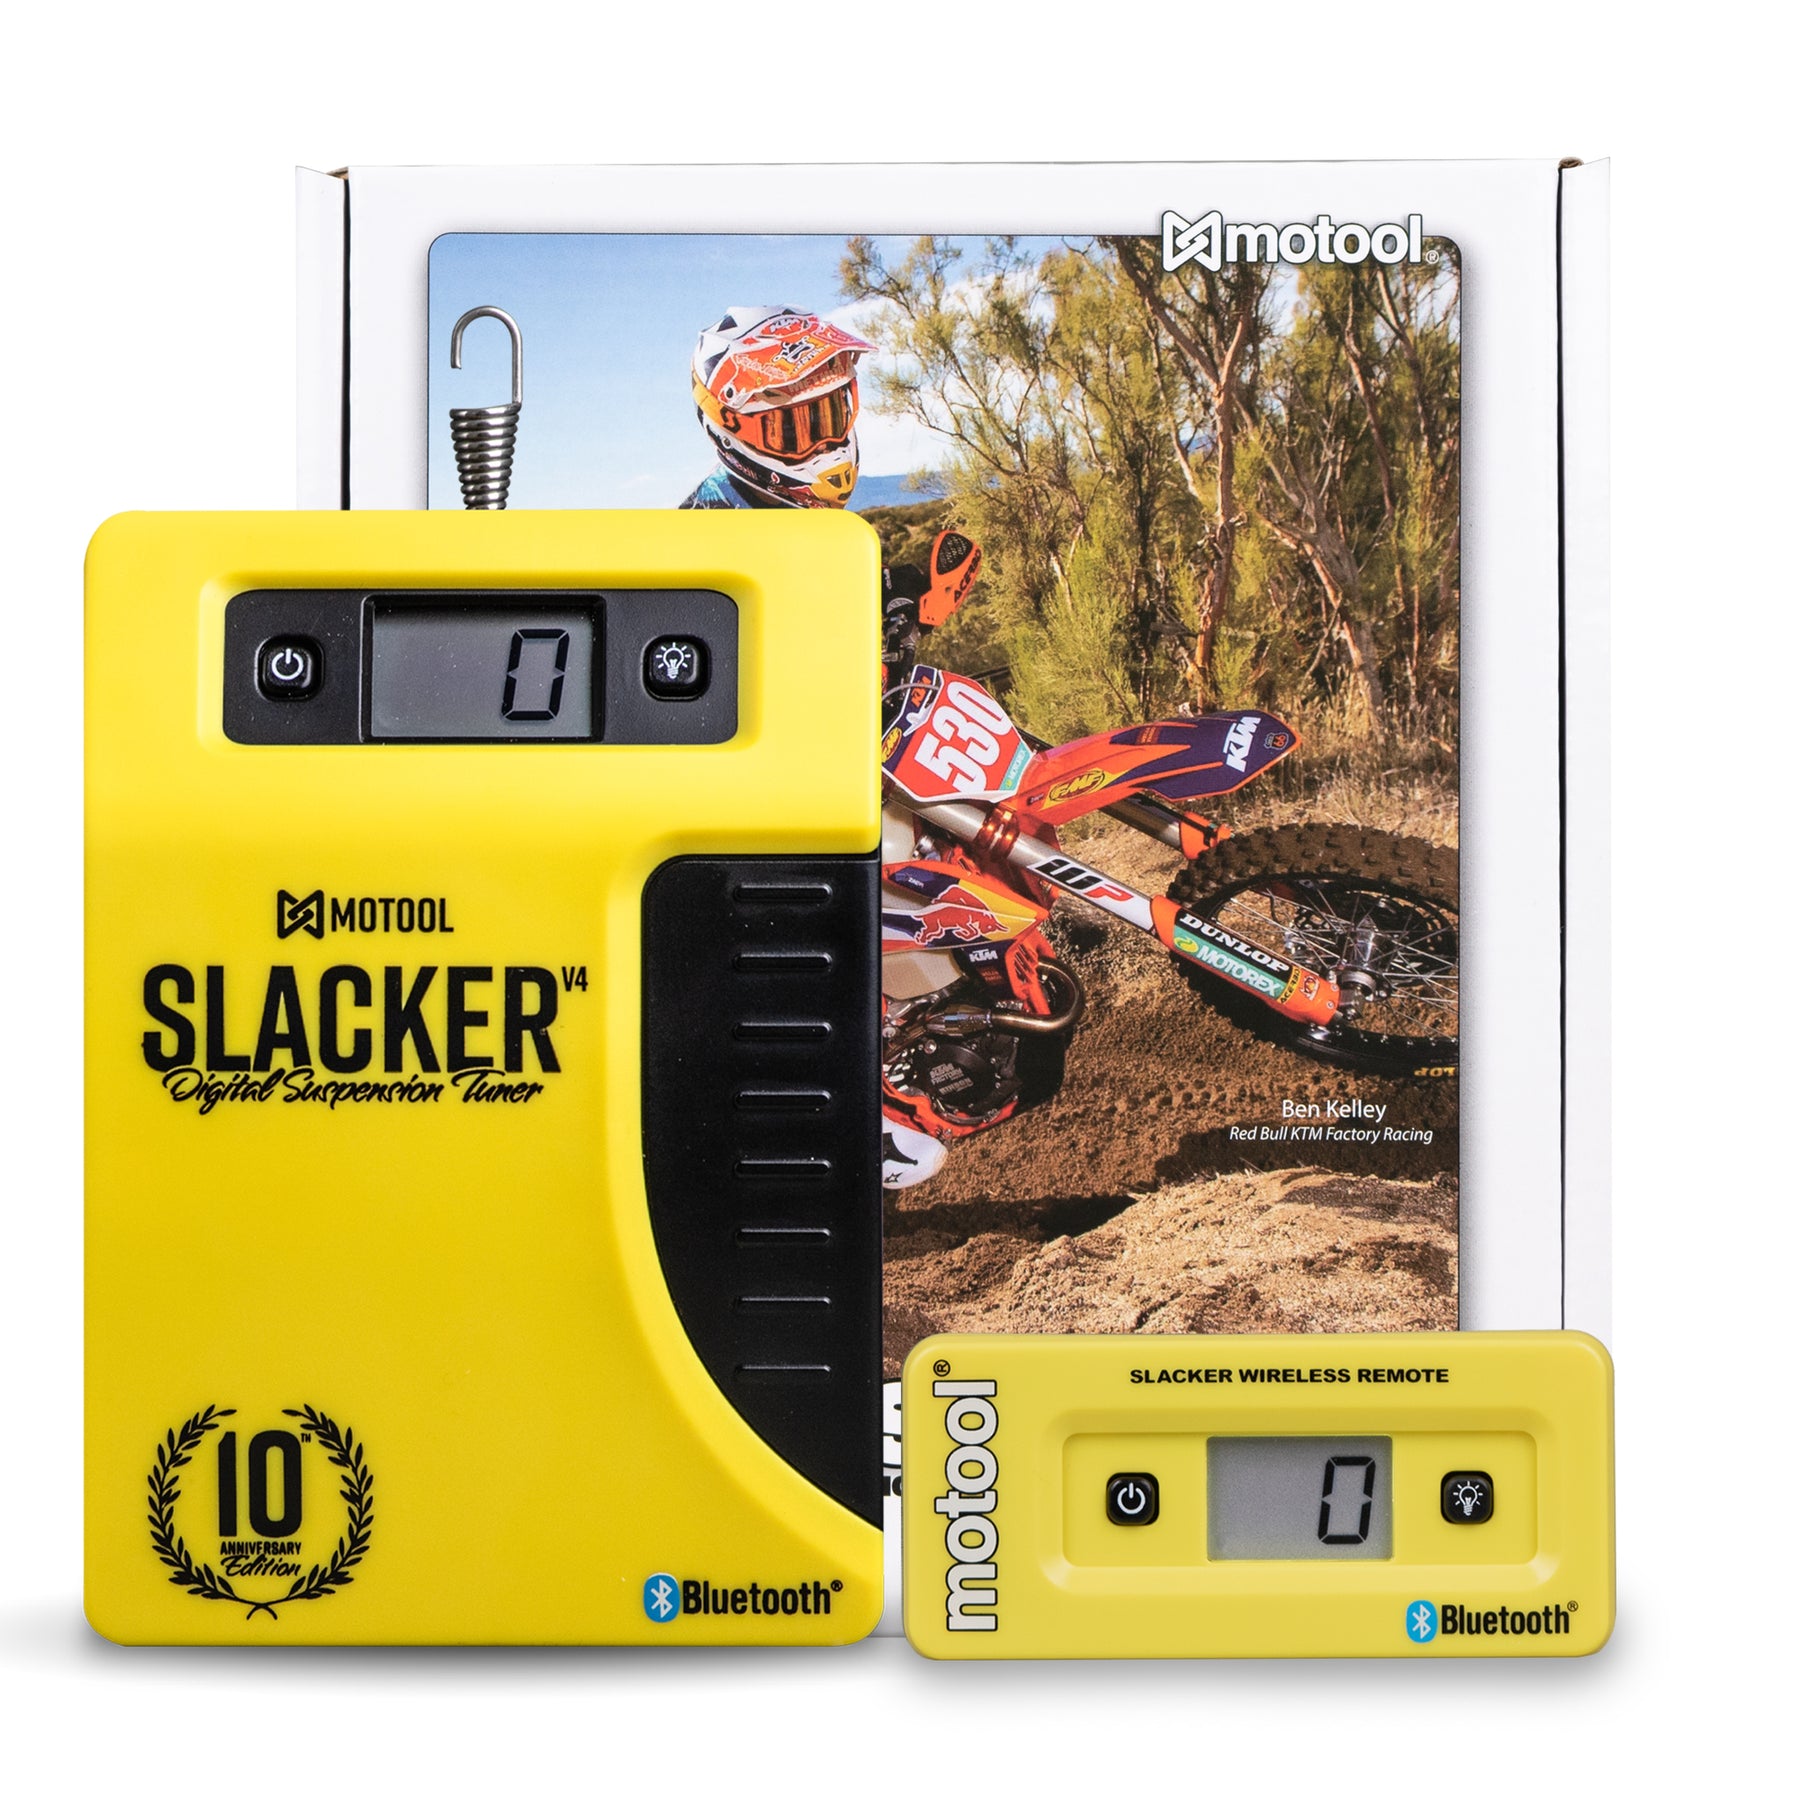 Slacker digital suspension tuner for precisely setting sag on motorcycles and mountain bikes.